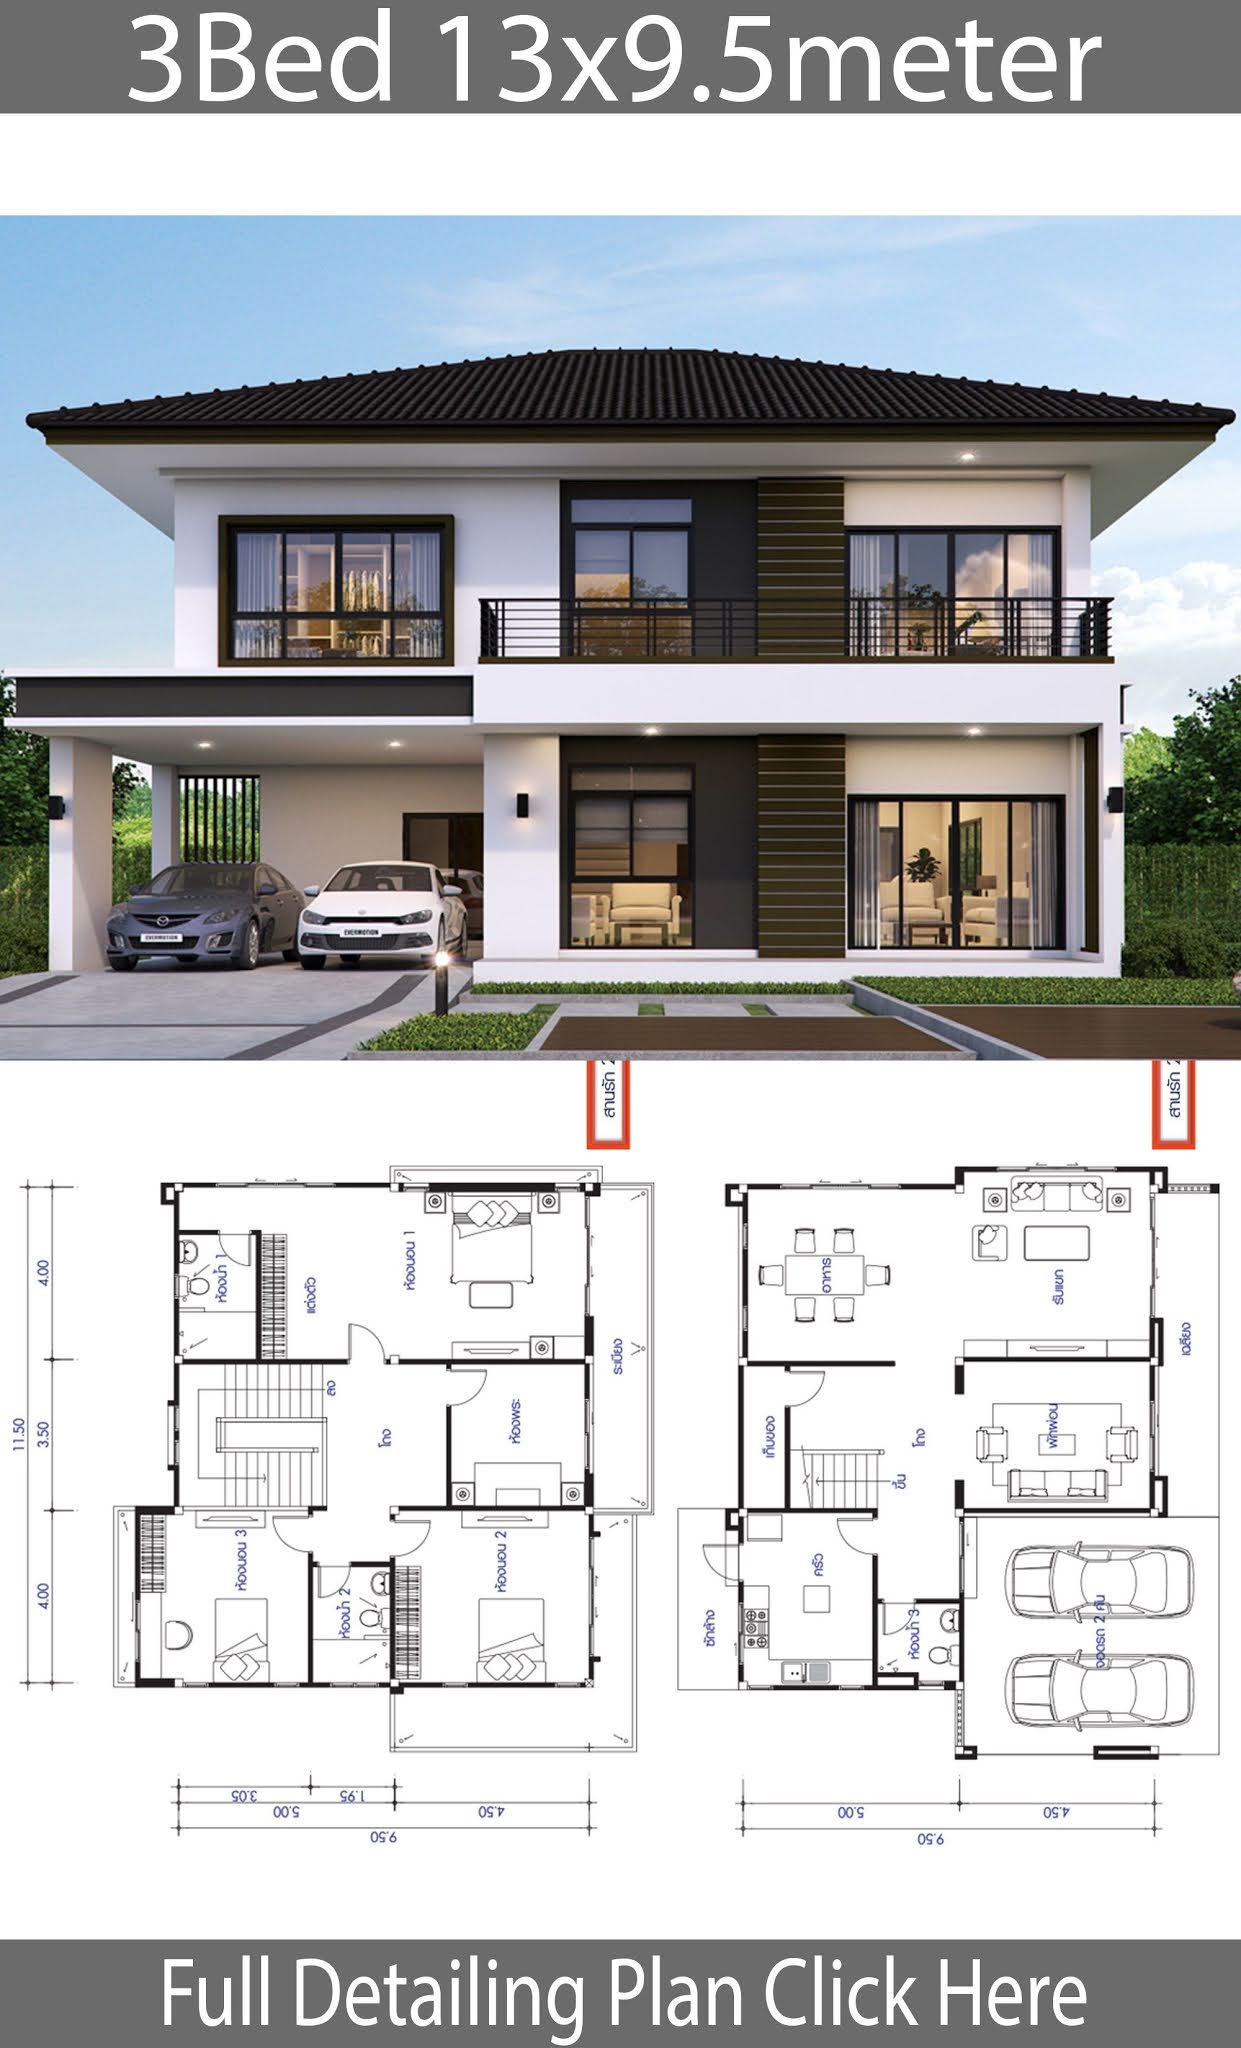 House Design Plan 13x9 5m With 3 Bedrooms House Designs Exterior Modern House Design Home Design Plans 